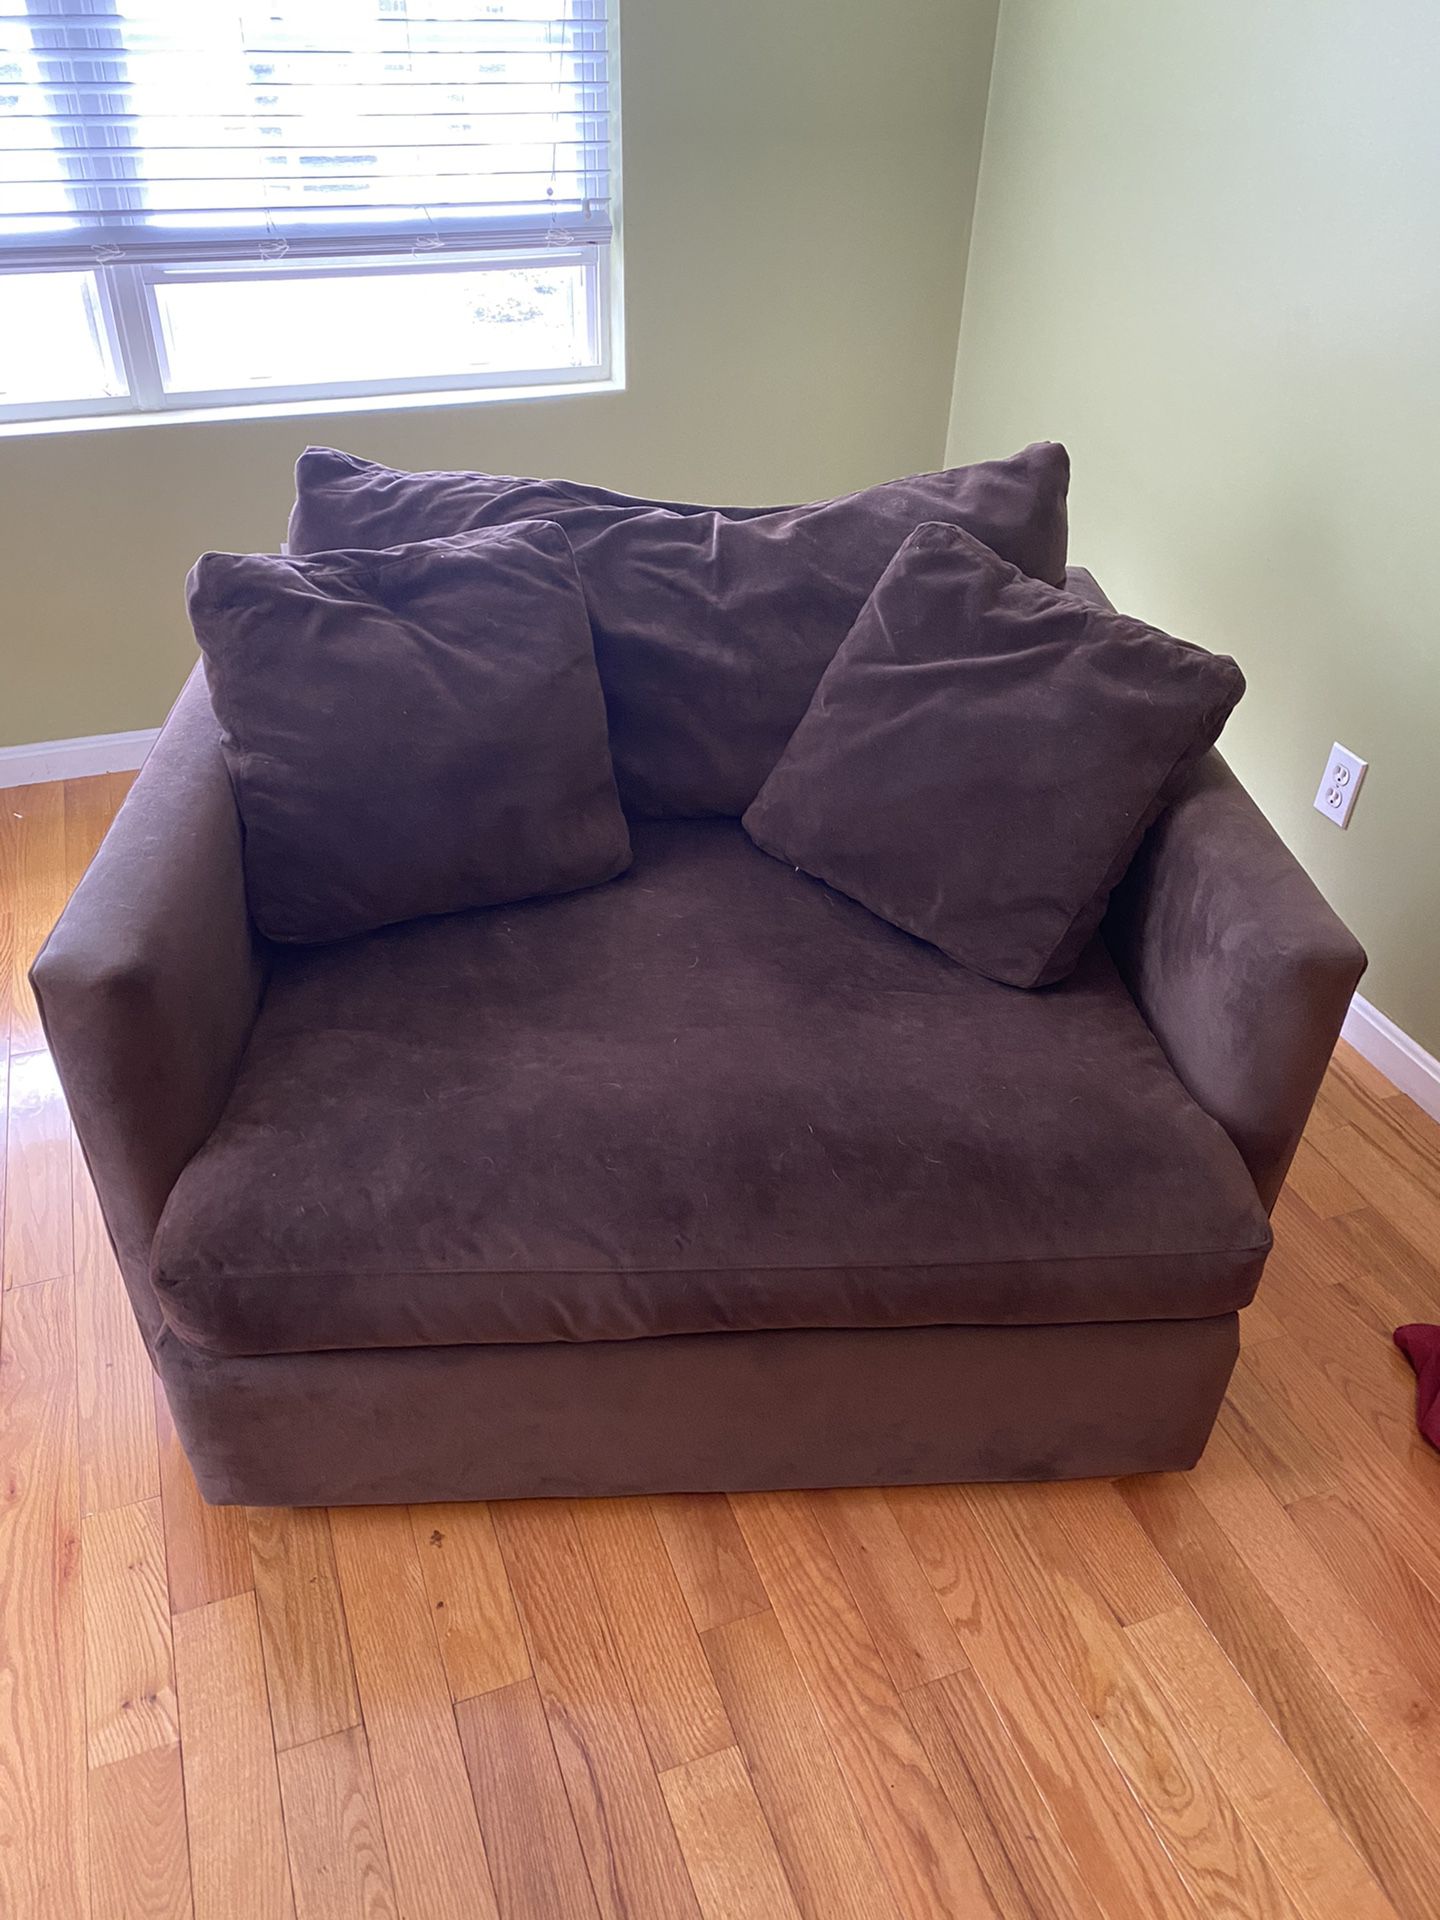 Oversized Chair and Ottoman (Crate & Barrel)